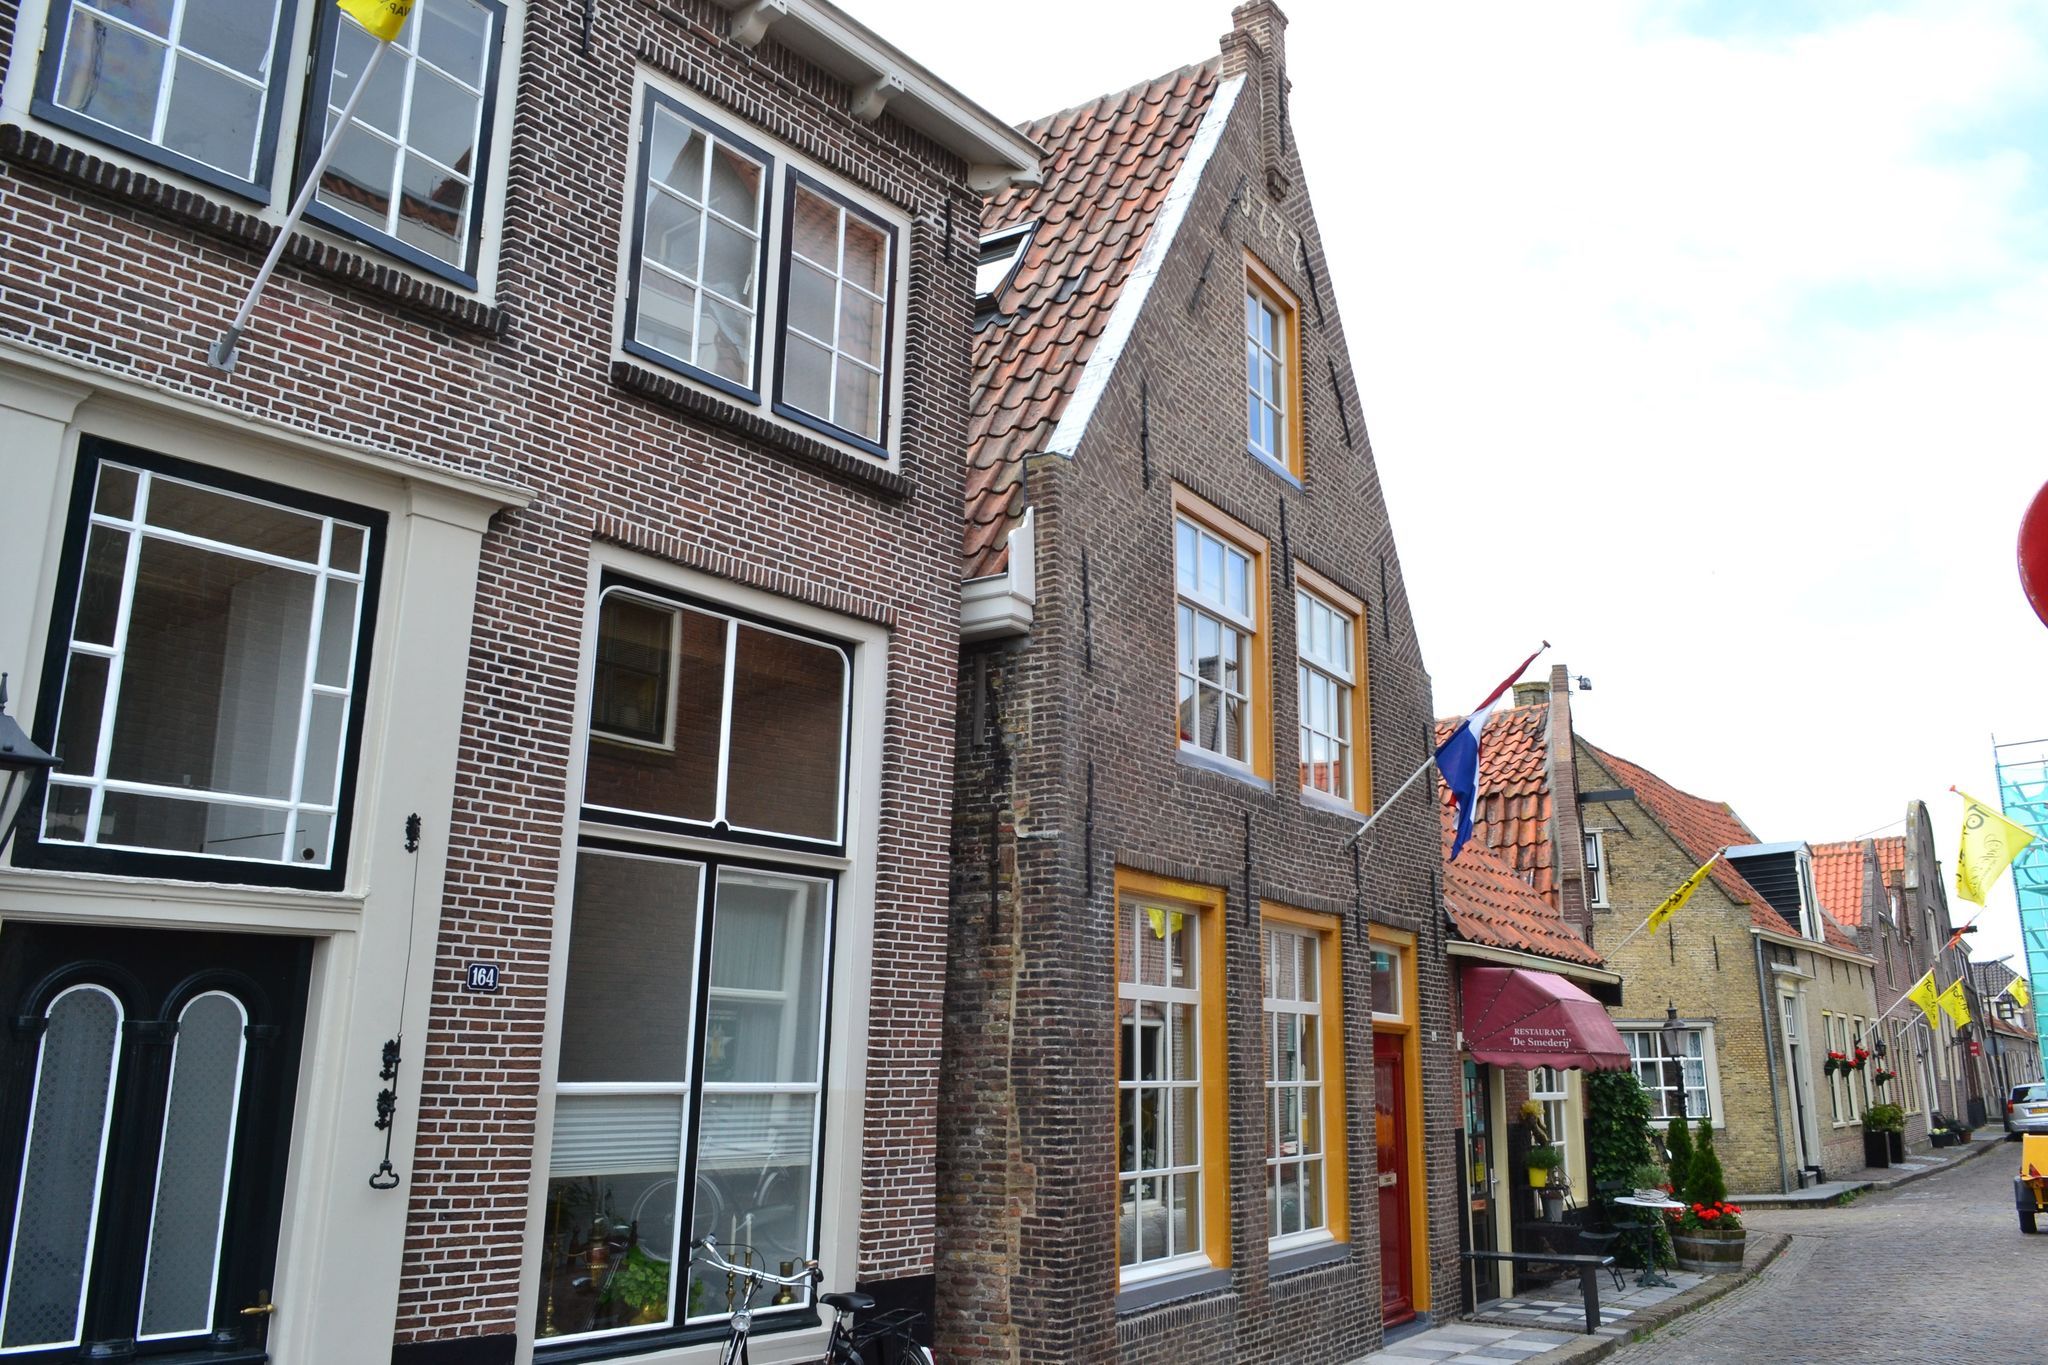 Listed 1777 building in historical Enkhuizen